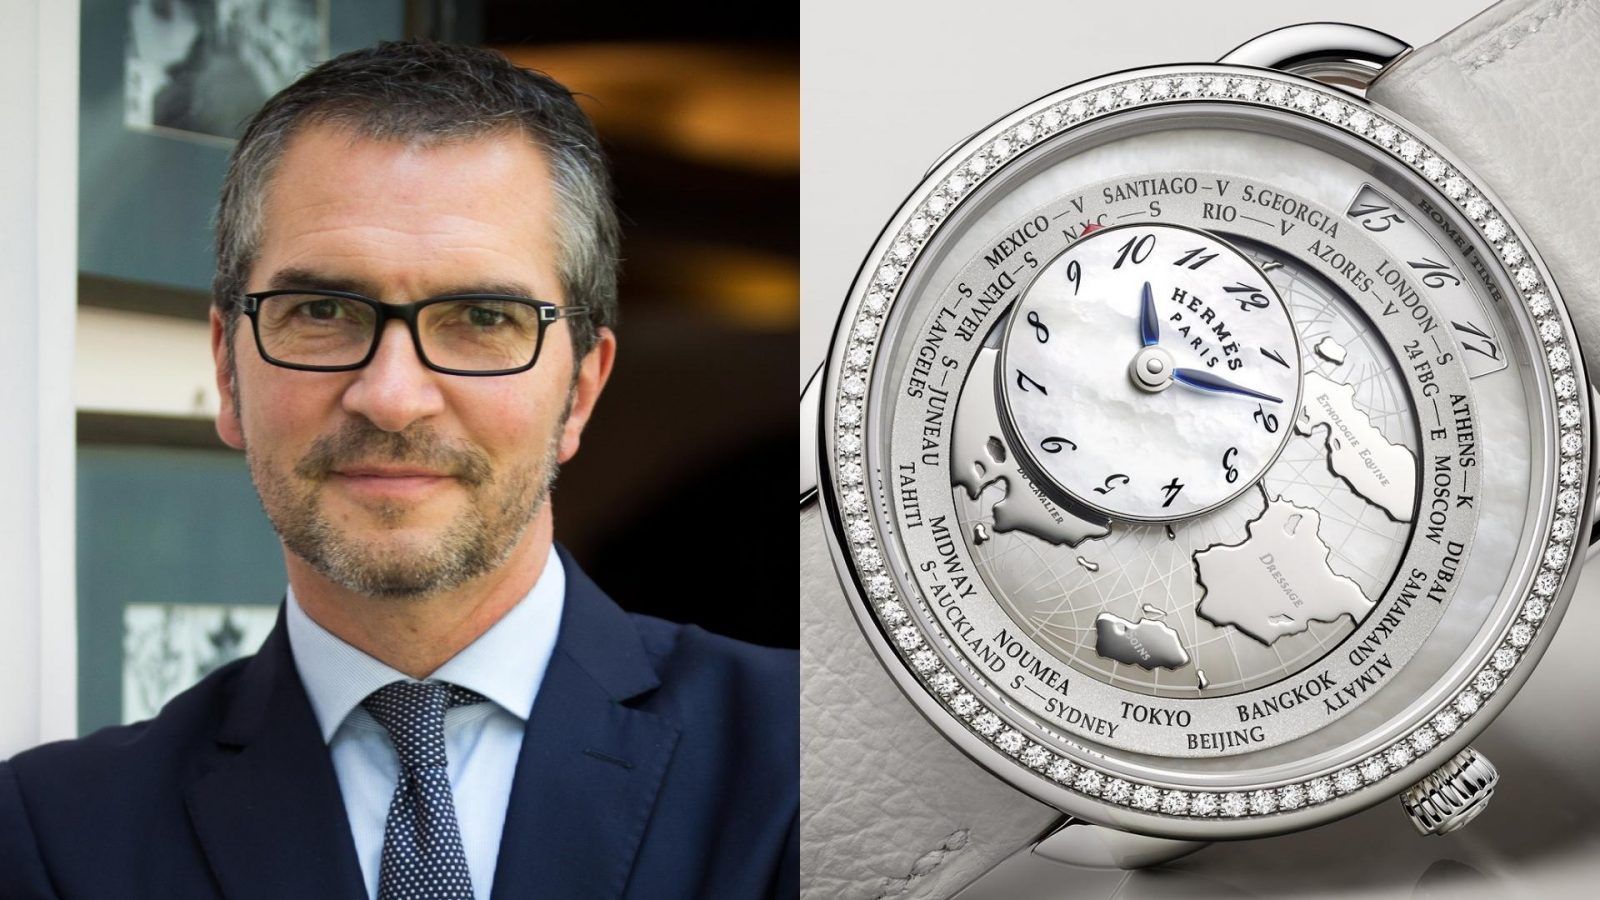 Hermès’ Philippe Delhotal believes in the storytelling power of a beautiful timepiece